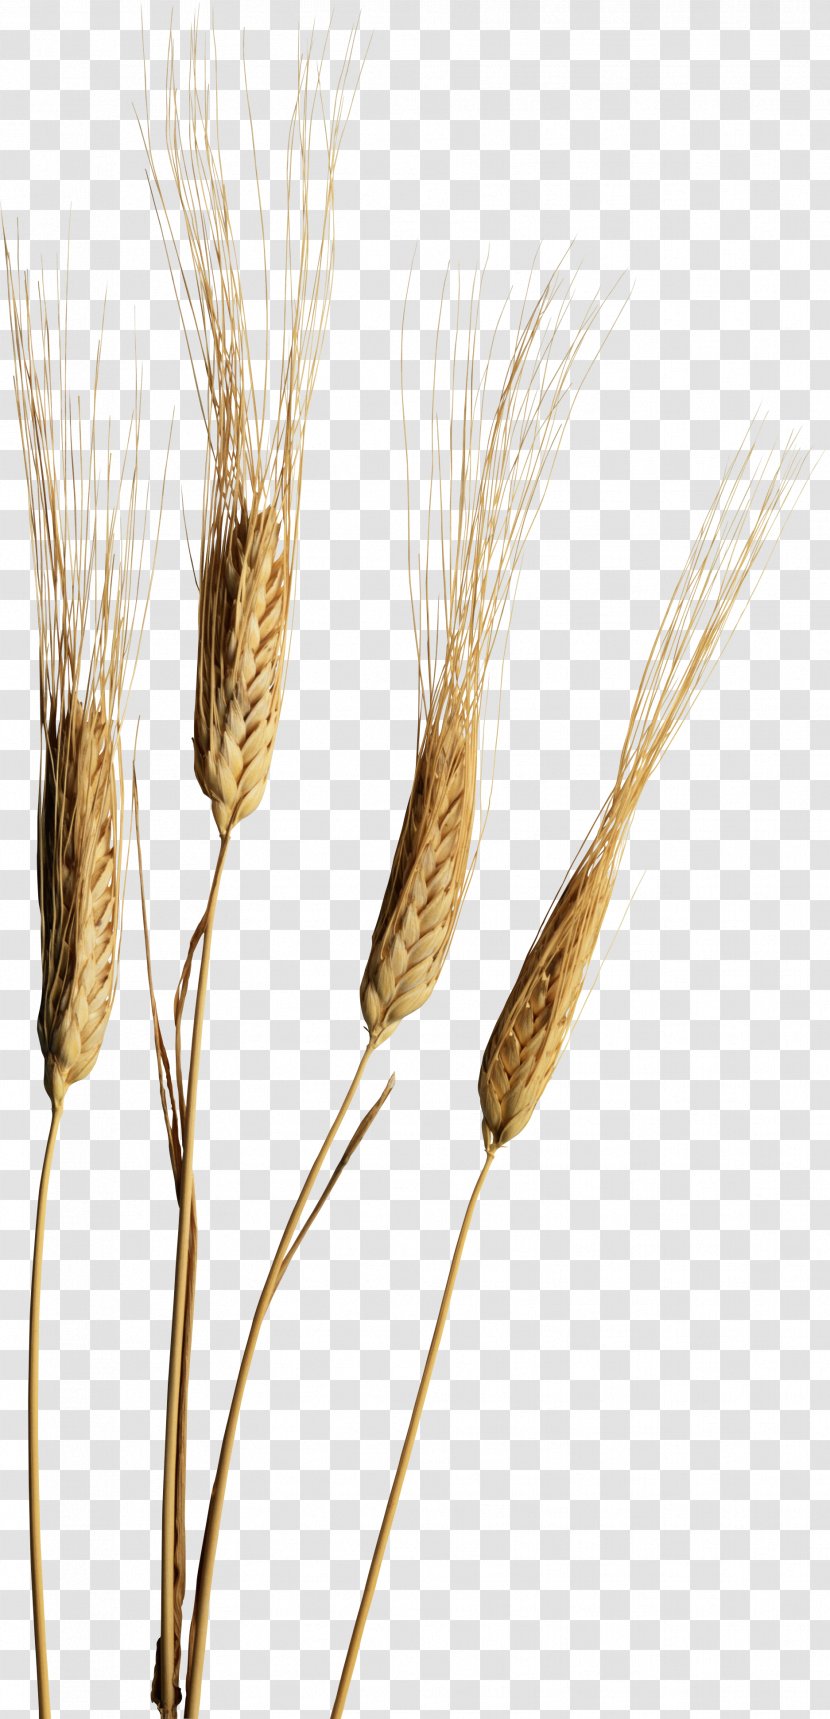 Emmer Rye - Commodity - Wheat Transparent PNG